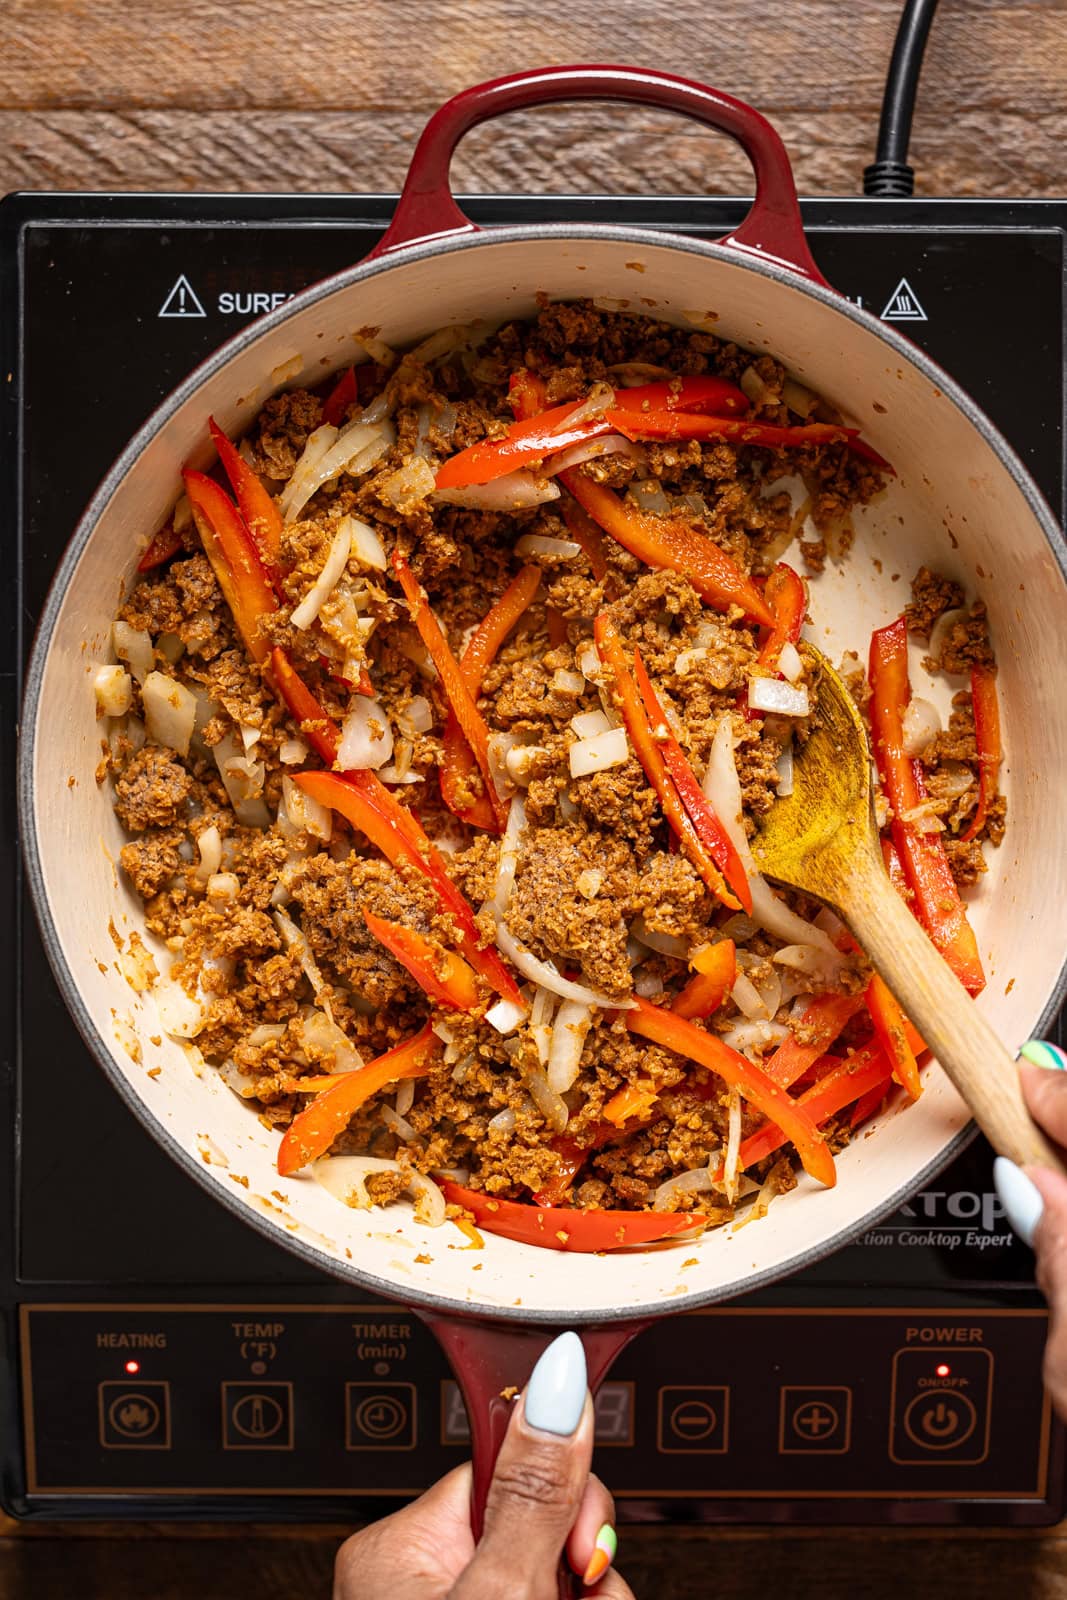 Cooked plant-based meat crumble and veggies in a pot being stirred with a spoon.